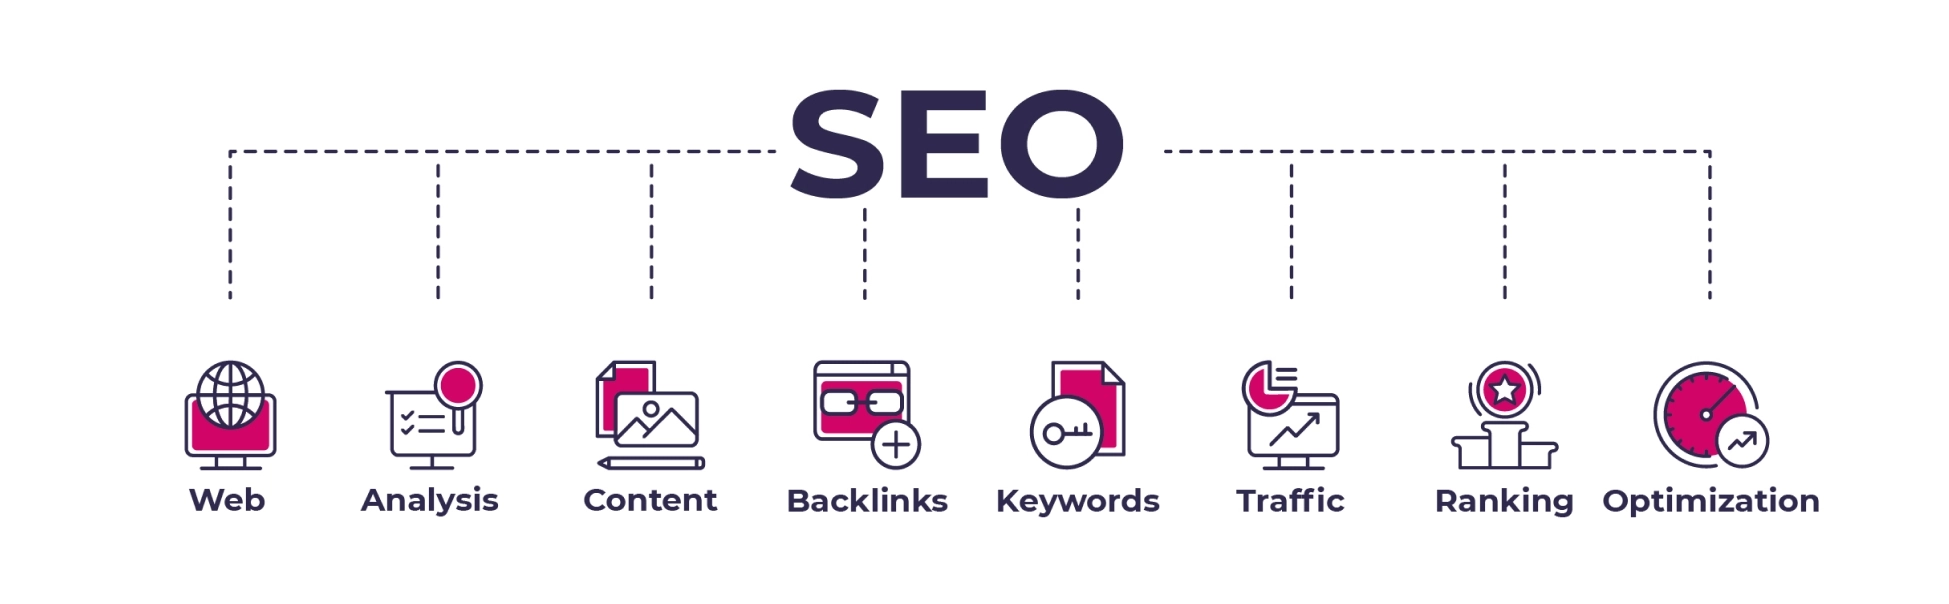 A Diagram Illustrating Various Search Engines, With Emphasis On Seo.